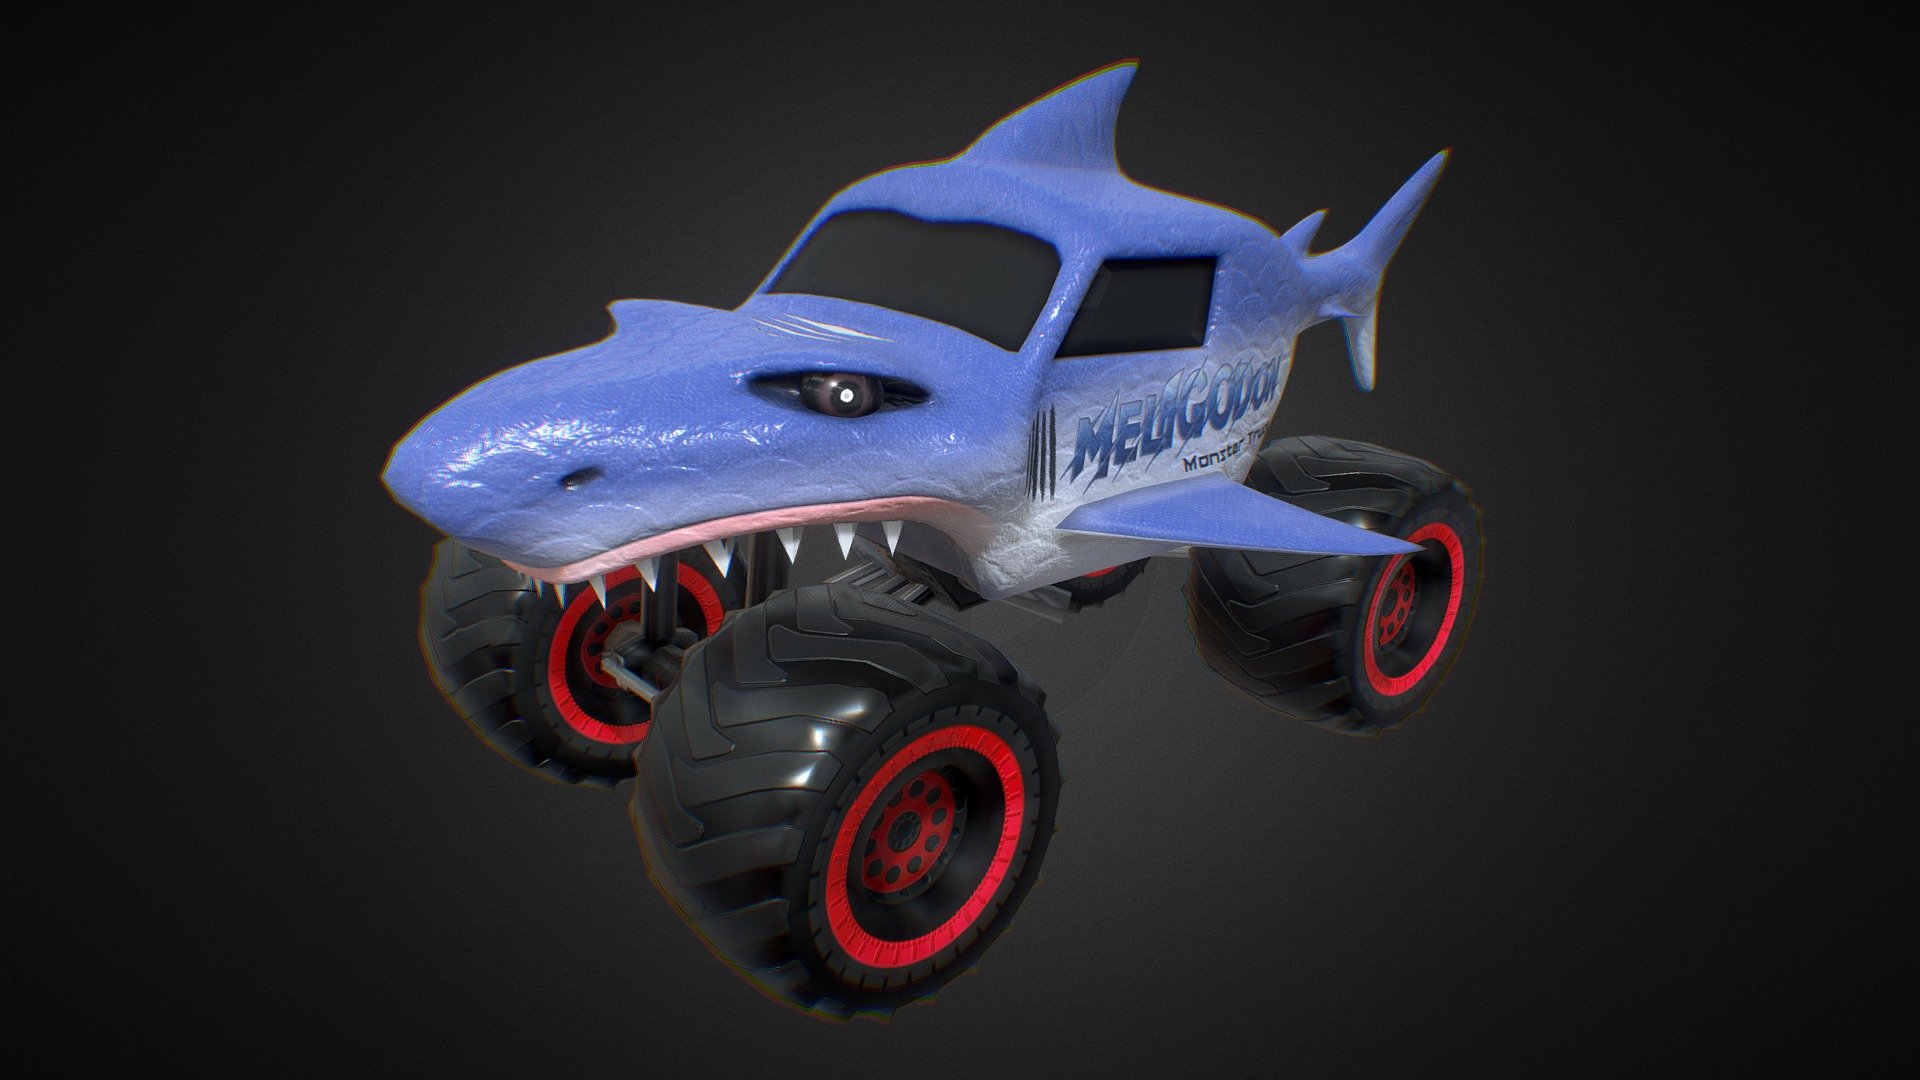 Shark Monster Truck 3d model with PBR textures. Lowpoly gameready and optimized, ready to use in any car or monster truck racing or simulation games 3d model